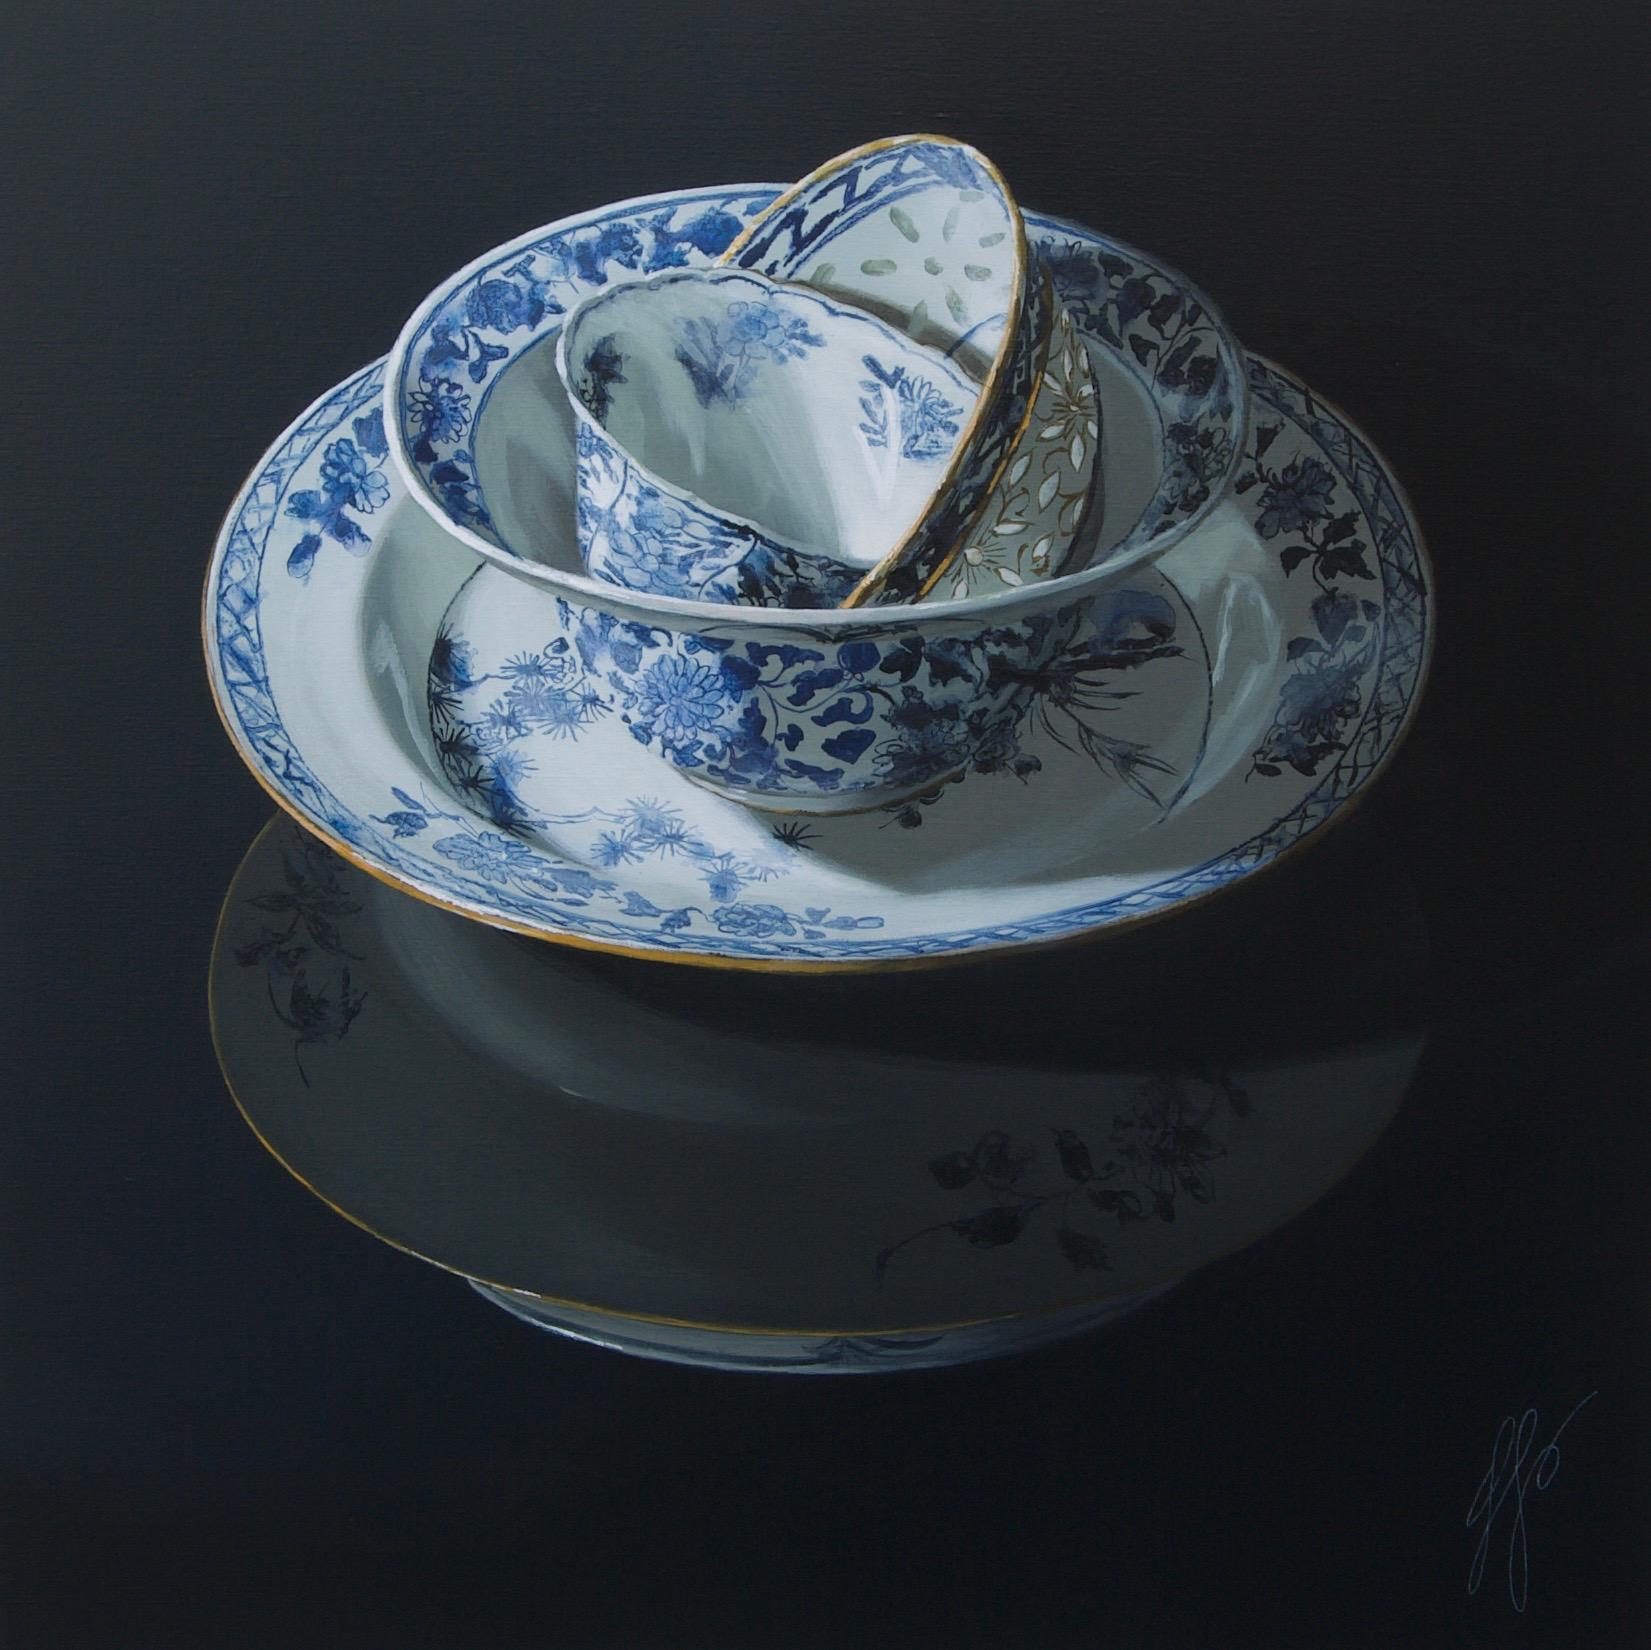 Sasja Wagenaar Figurative Painting - "Chinese porcelain stacking of bowls and plates on dark" Still-Life Painting